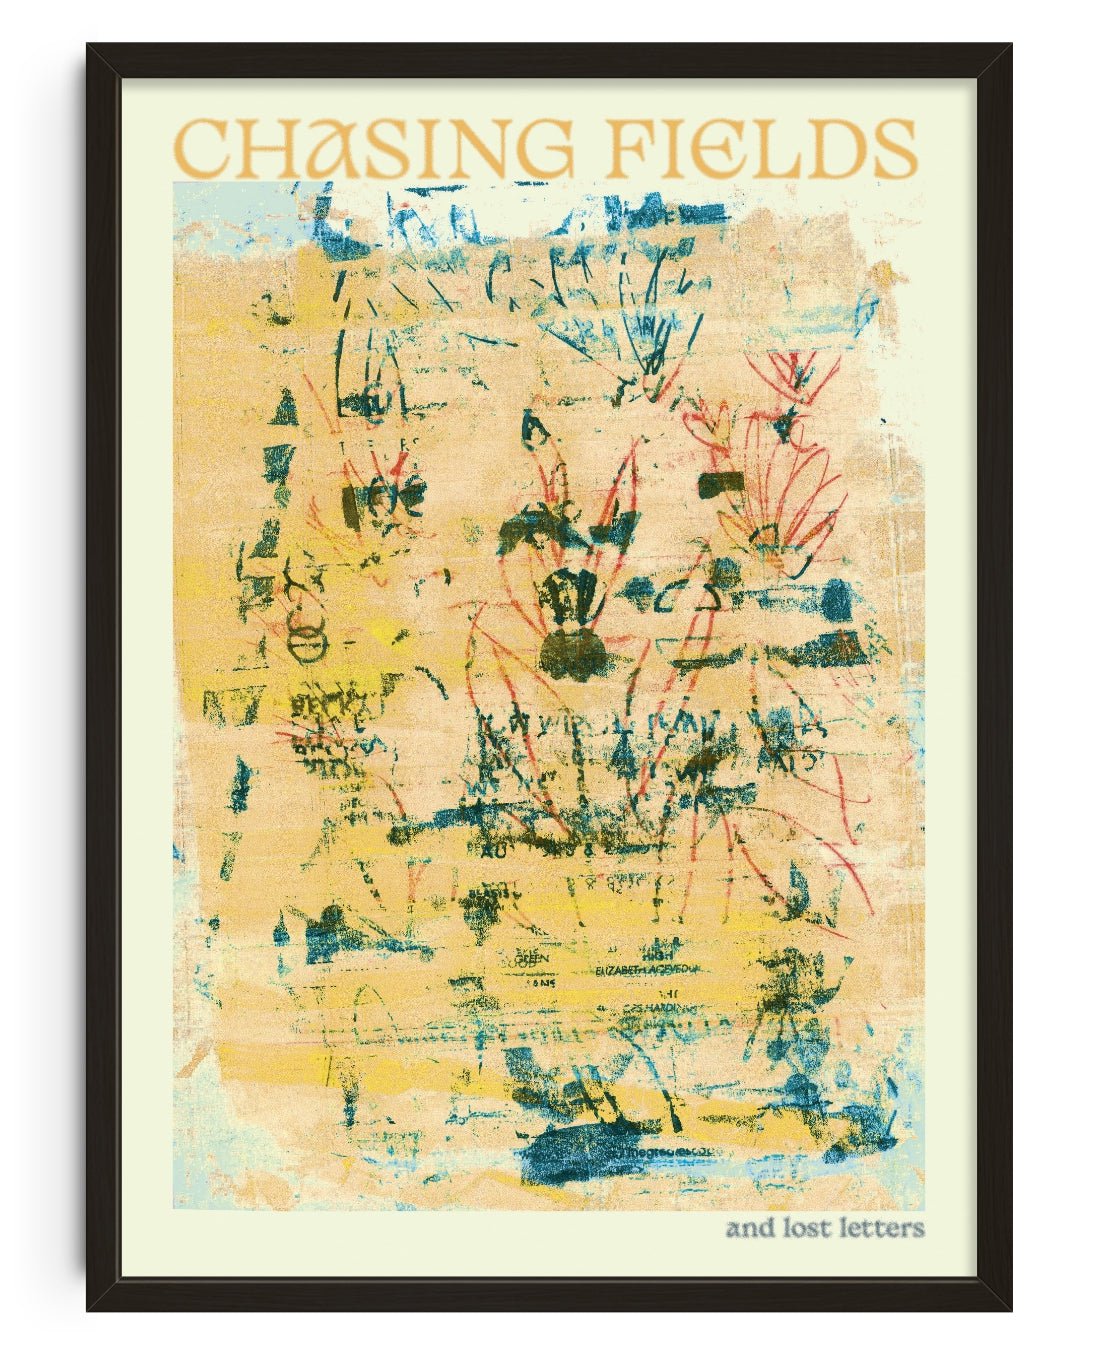 11.7x16.5" (A3) Chasing Fields - UNFRAMED contemporary wall art print by DROOL Collective - sold by DROOL